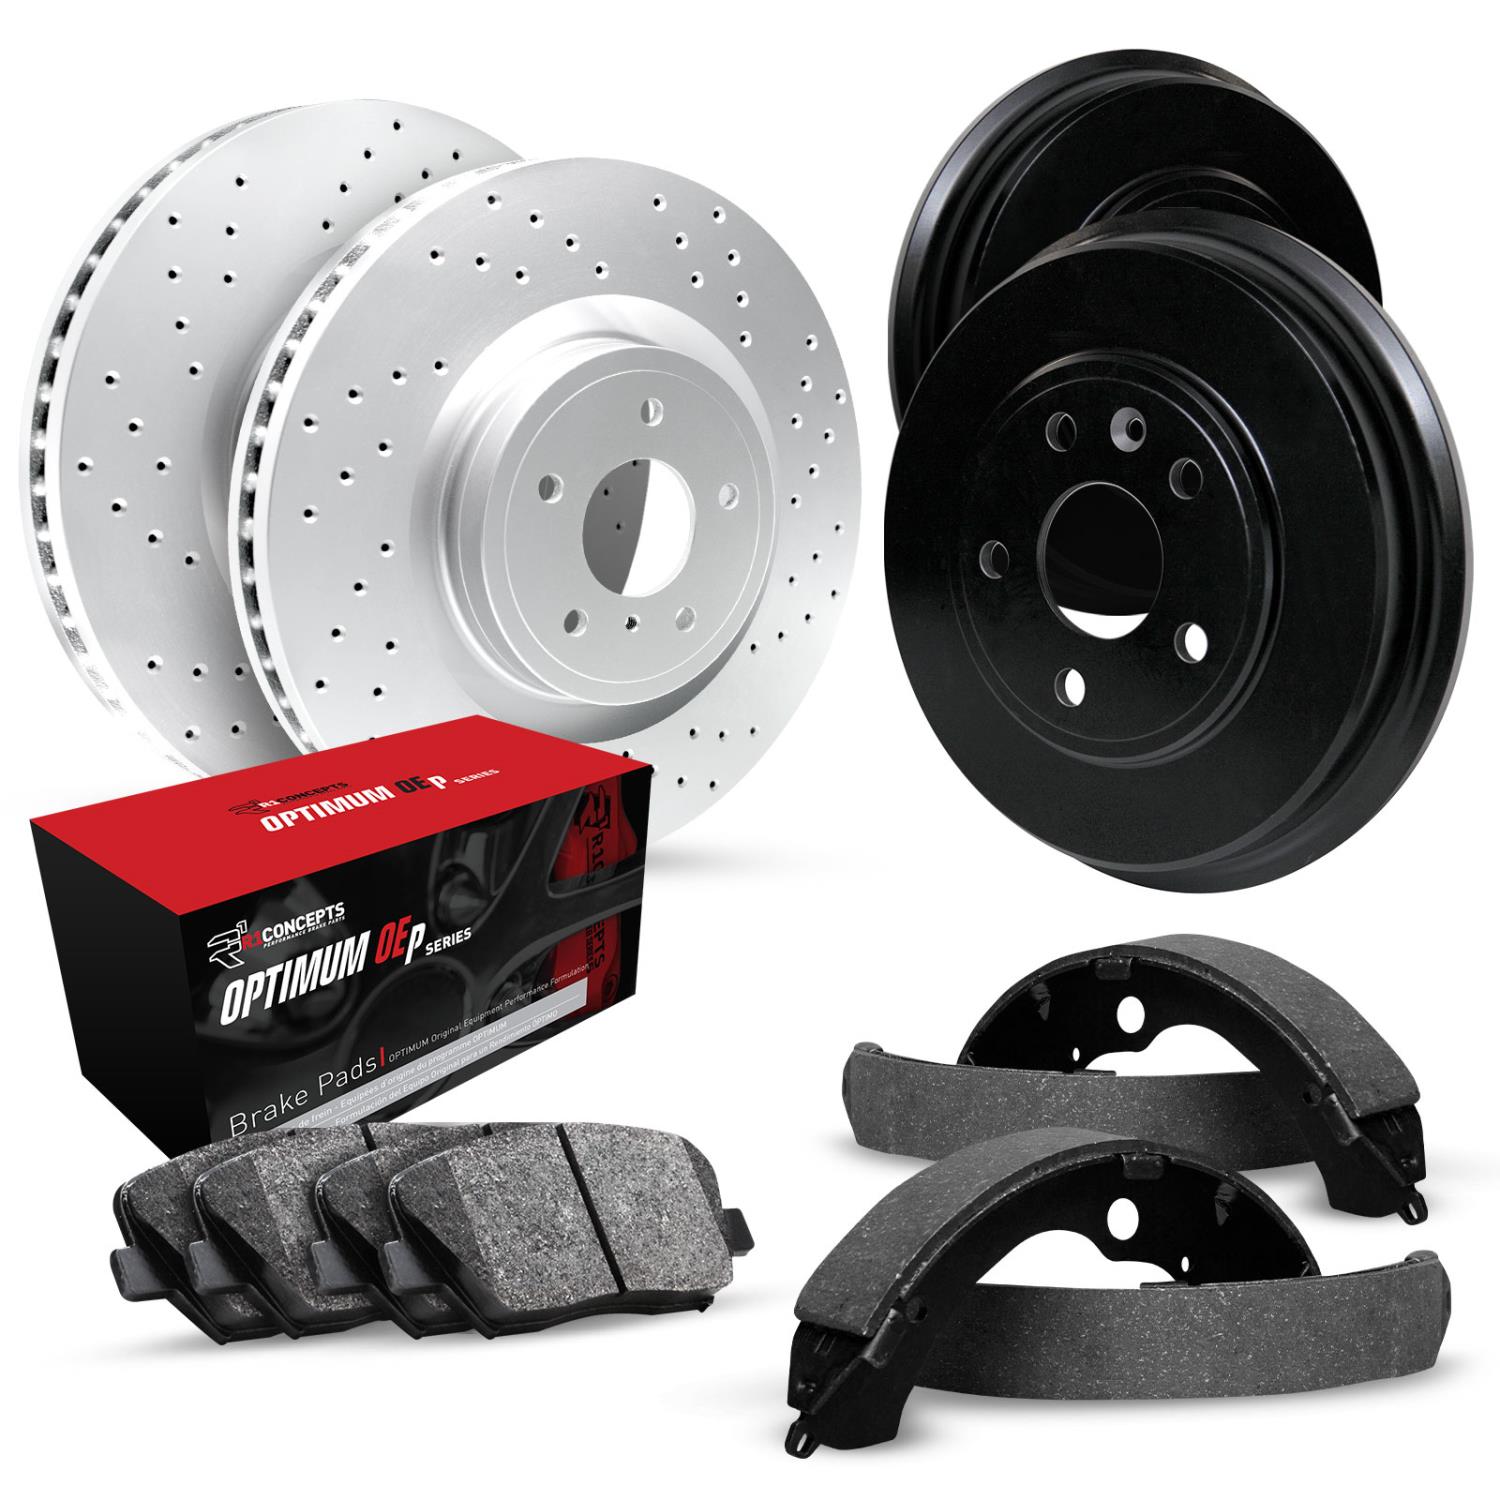 GEO-Carbon Drilled Brake Rotor & Drum Set w/Optimum OE Pads & Shoes, 1985-1986 GM, Position: Front & Rear